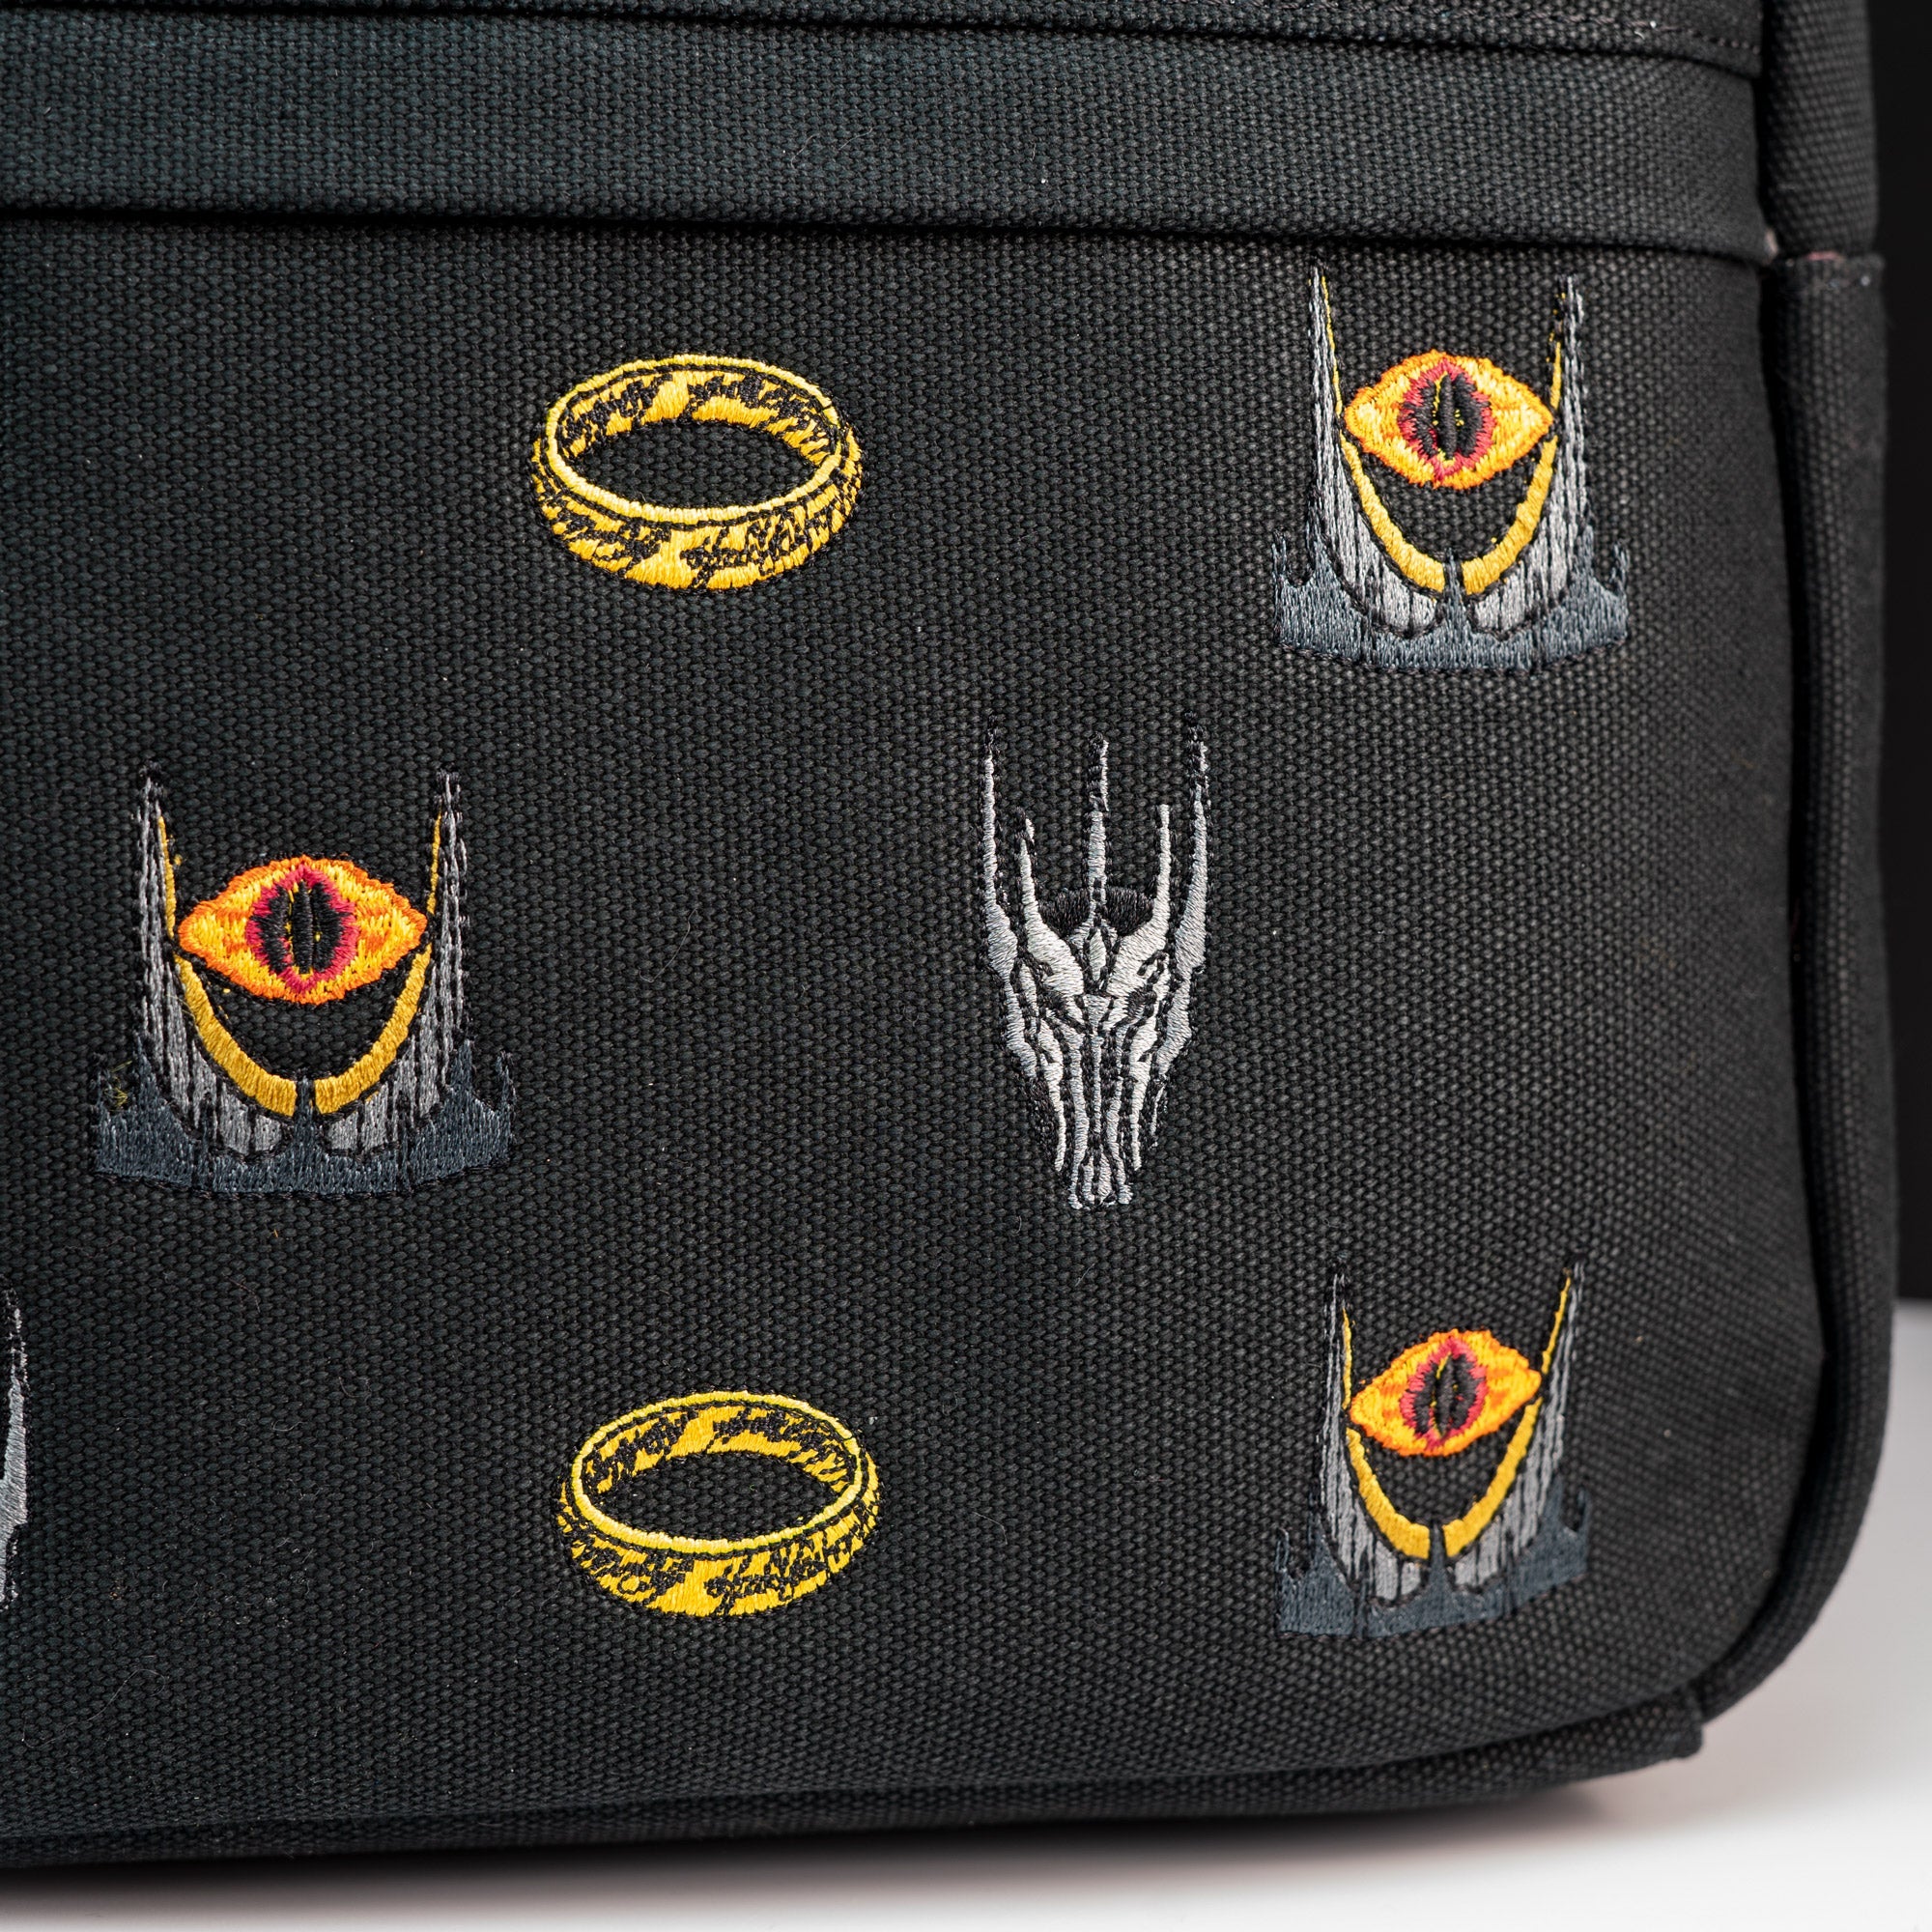 Loungefly x The Lord of the Rings Sauron Canvas Backpack - GeekCore